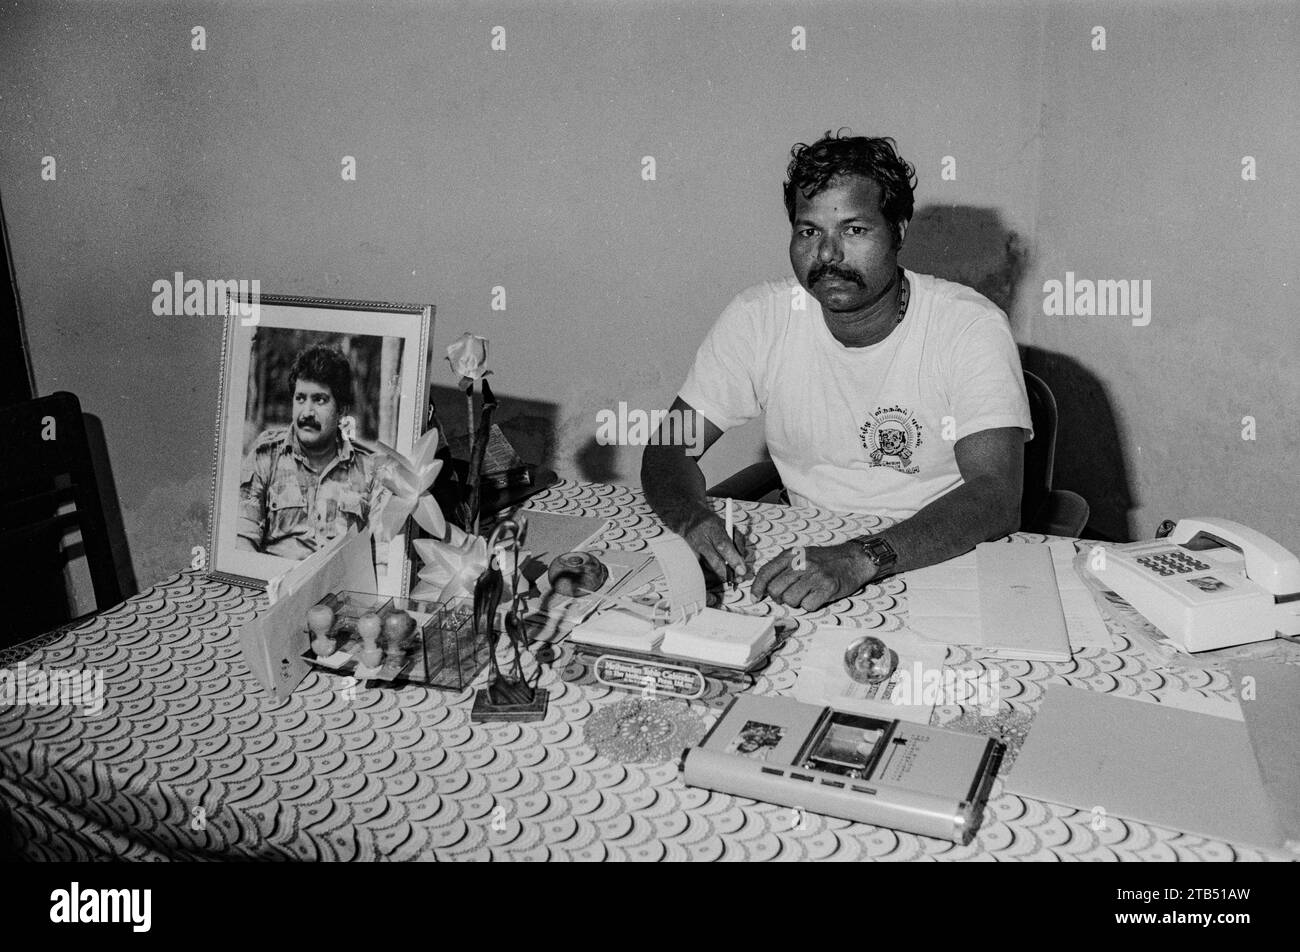 The Liberation Tigers of Tamil Eelam LTTE fought to create an independent Tamil state called Tamil Eelam in the northeast of the island, due to the continuous discrimination and violent persecution against Sri Lankan Tamils by the Sinhalese-dominated Sri Lankan Government. Leader Velupillai Prabhakaran cited violent incidents of the 1958 anti-Tamil pogrom during his childhood that led him to militancy. In 1975, he assassinated the Mayor of Jaffna Alfred Duraiappah in revenge for the 1974 Tamil conference incident. The LTTE was founded in 1976 as a reaction to the Sri Lankan Constitution 1972 Stock Photo